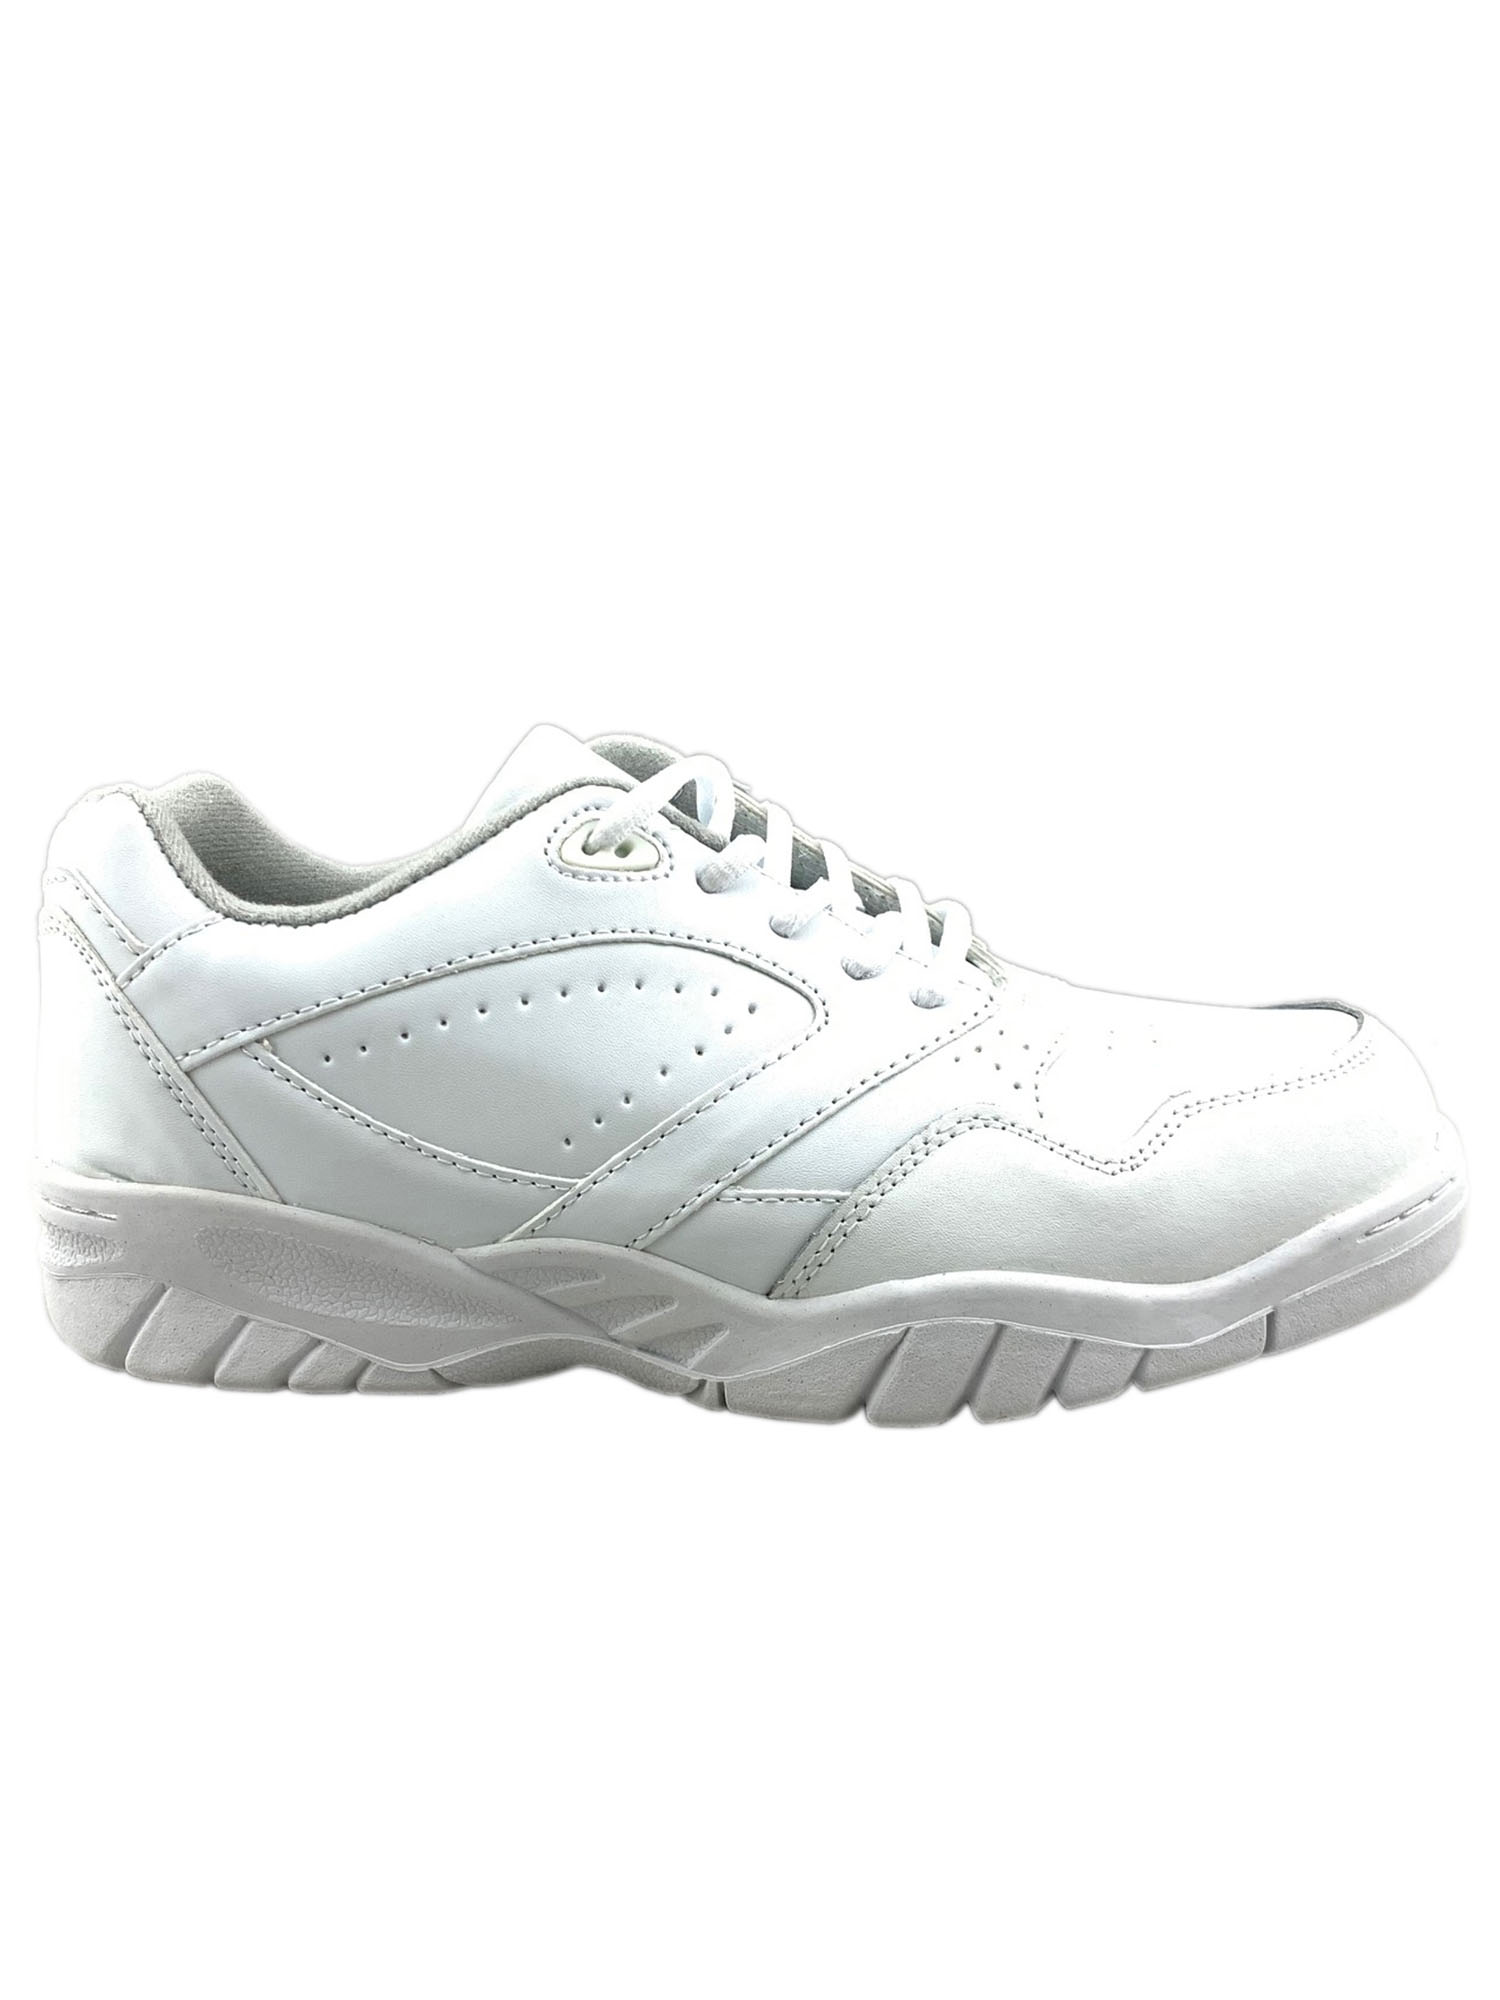 Tanleewa Men's Leather White Sports Shoes Lightweight Sneakers Breathable Casual Shoe Size 13 - image 1 of 5